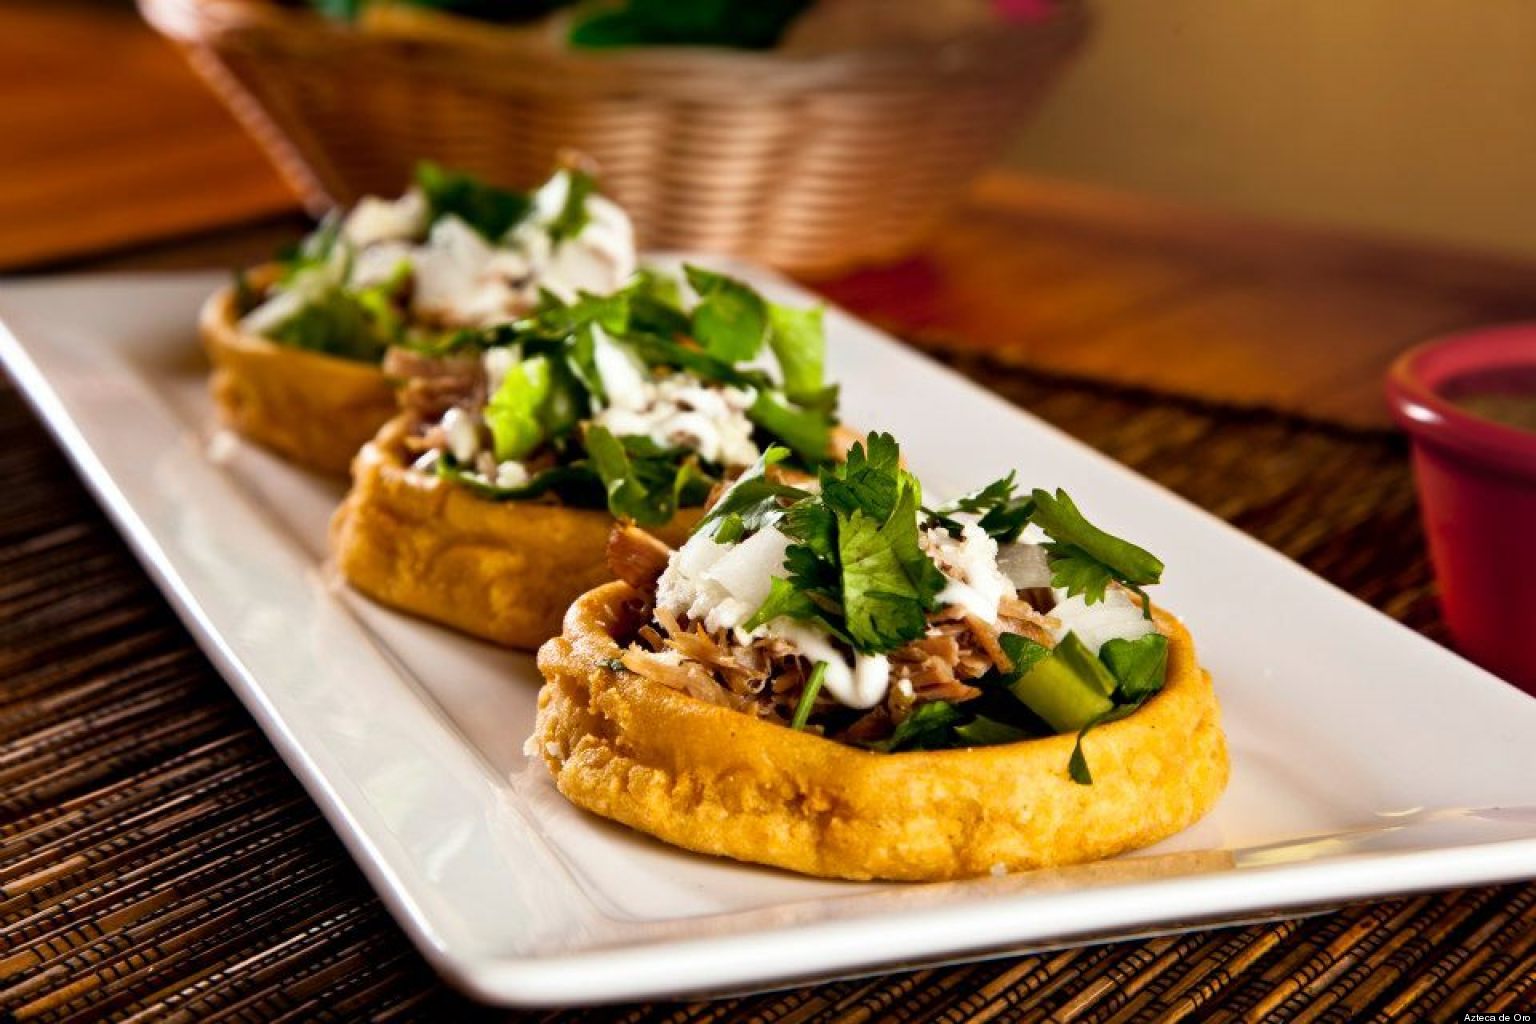 Best Mexican Restaurants Chicago: 10 Of The Tastiest Spots For Mexican